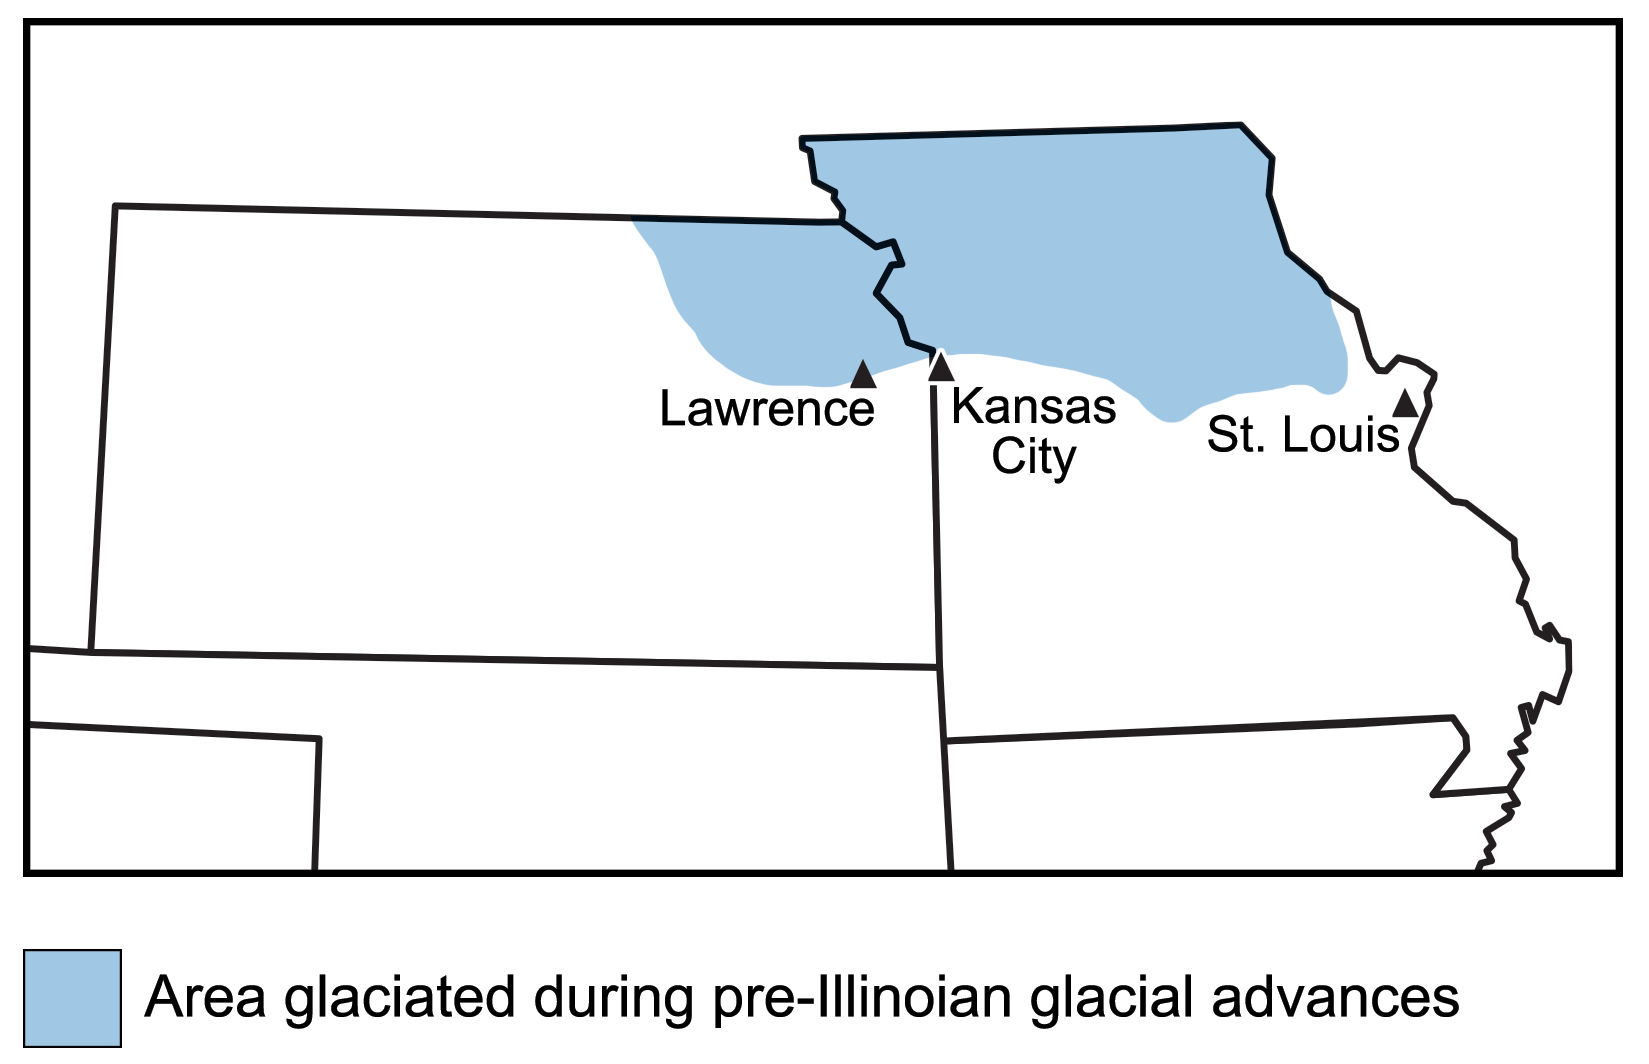 Map showing borders of Kansas and Missouri with major cities labeled. Formerly glaciated areas of northeastern Kansas and norther Missouri are shaded in light blue.